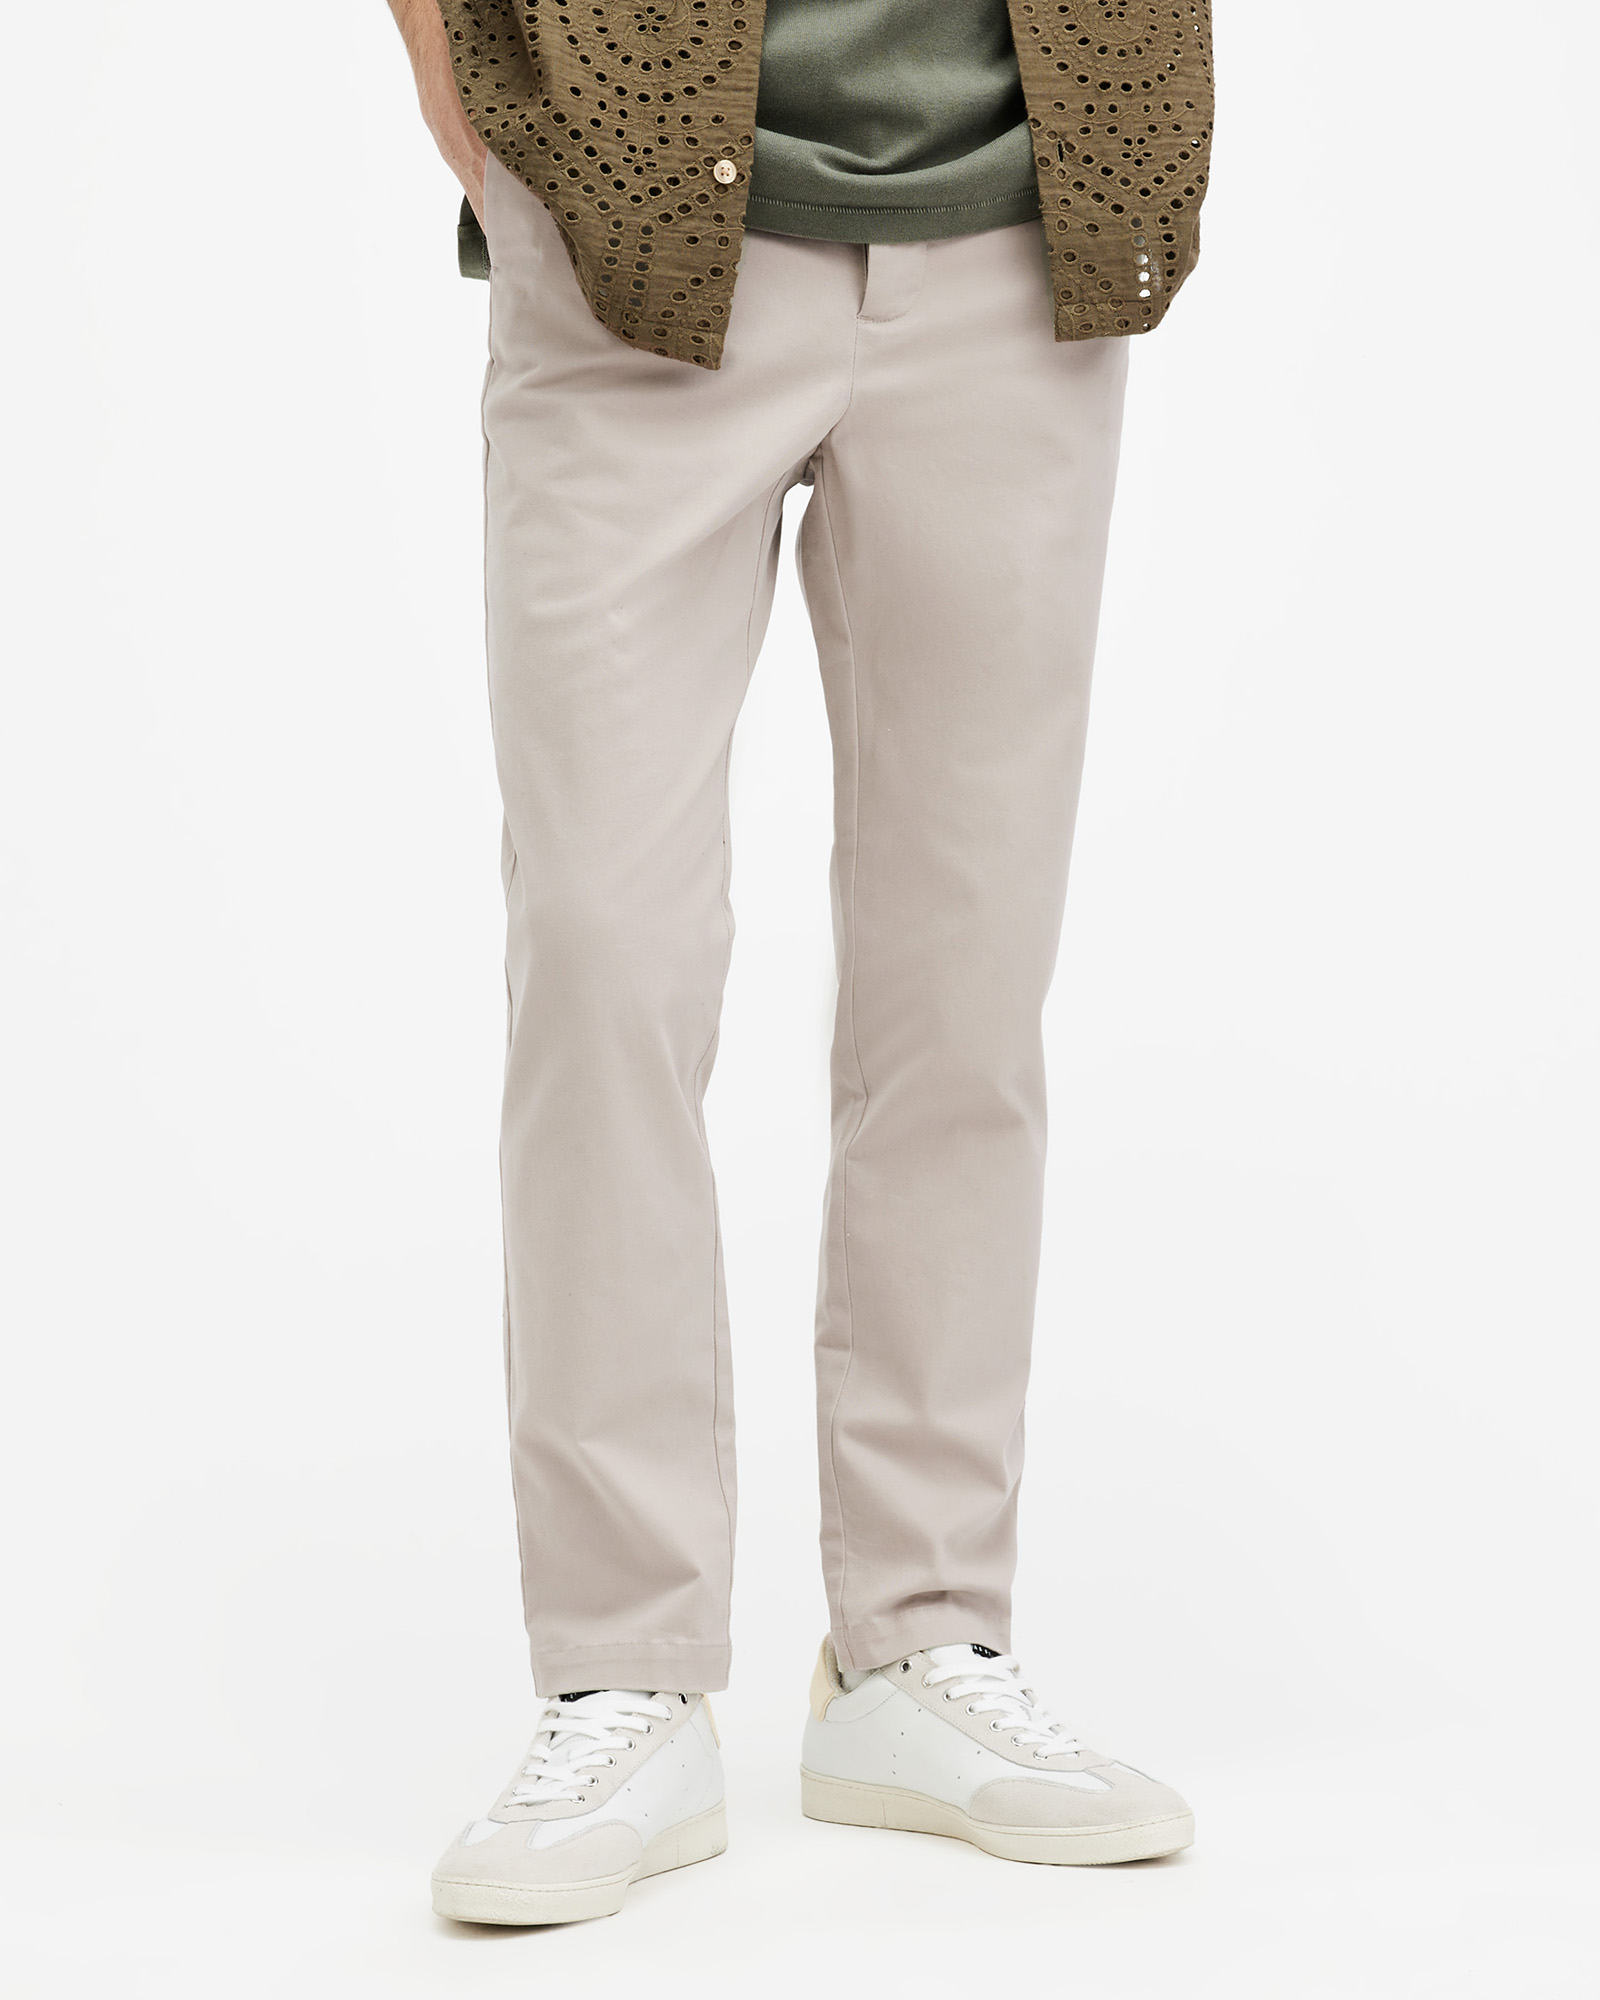 AllSaints Walde Skinny Fit Chino Trousers